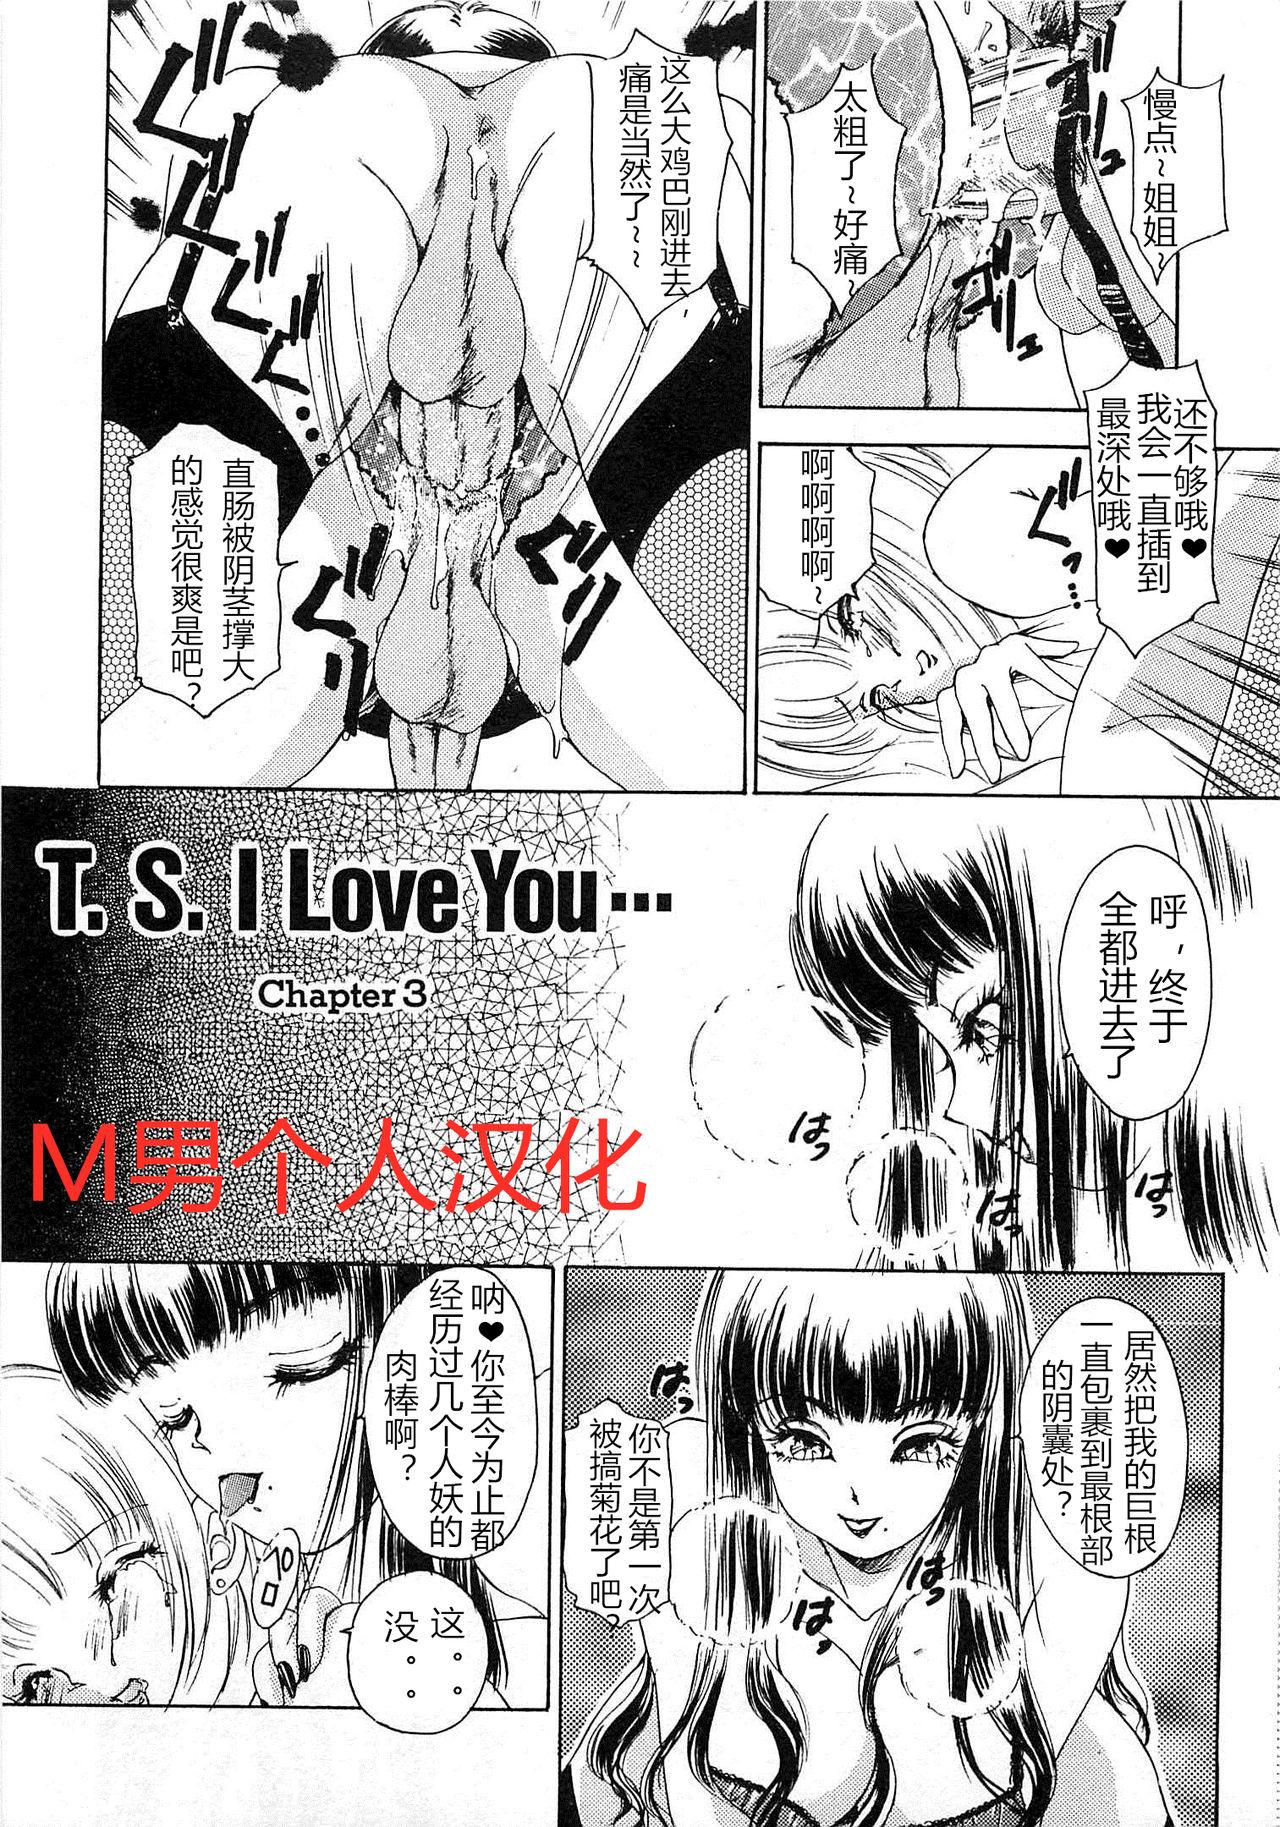 T.S. I LOVE YOU chapter 03 0